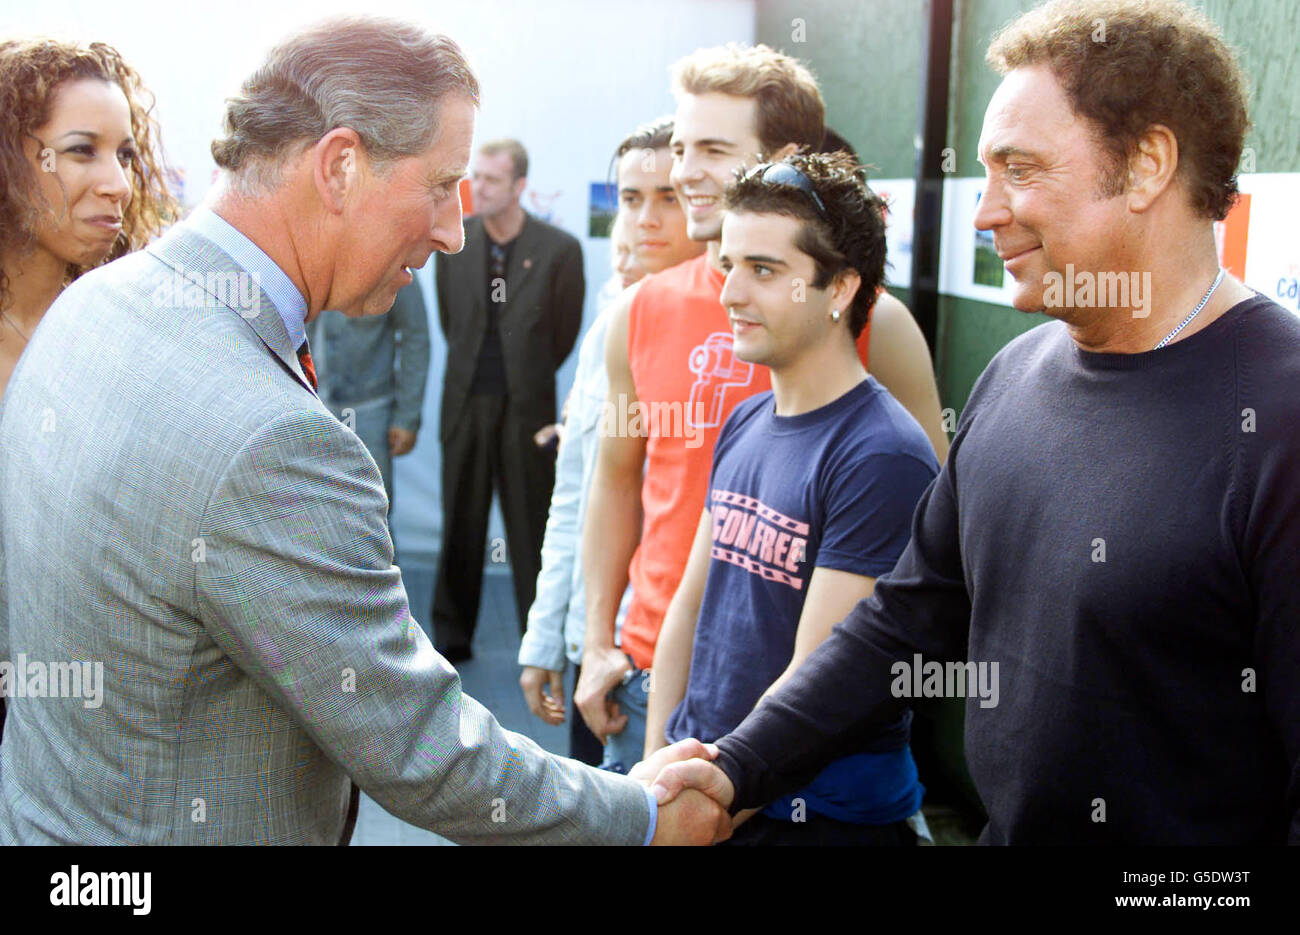 The Prince of Wales greets Welsh singer Tom Jones who performed at the Party in Park, held in Hyde Park central London. Stock Photo